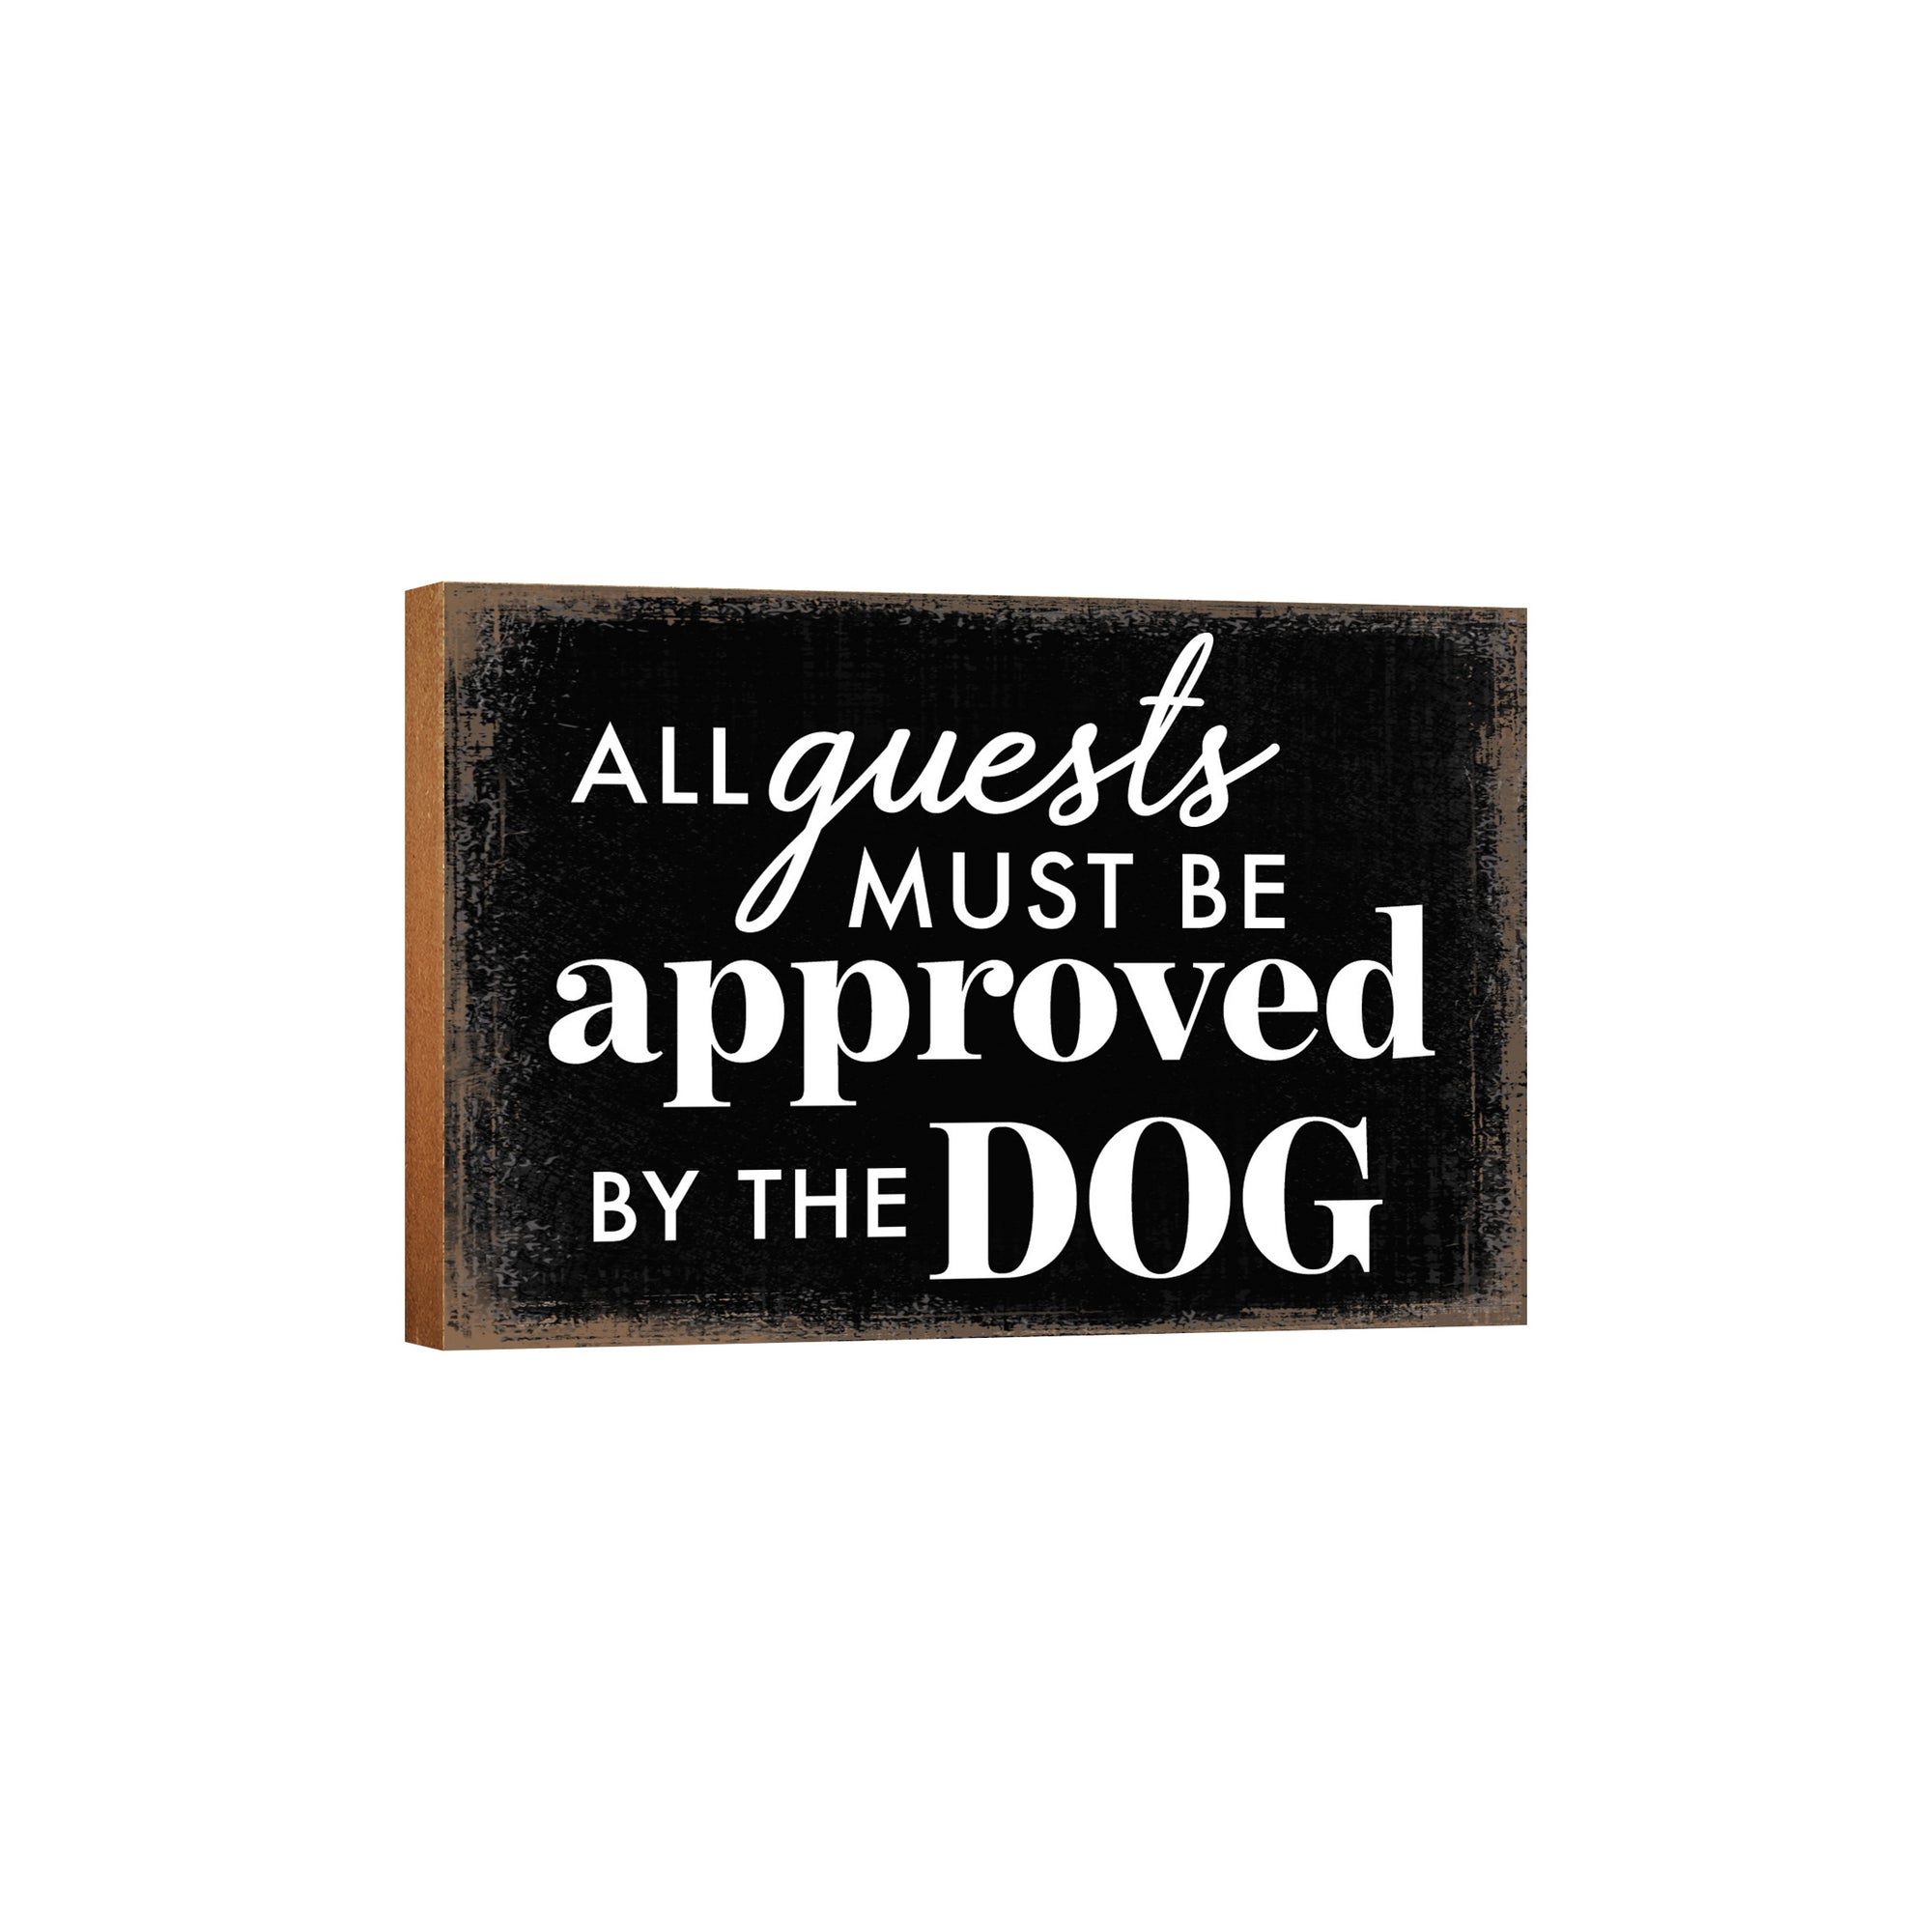 Wooden Shelf Decor and Tabletop Signs with Pet Verses - All Guests